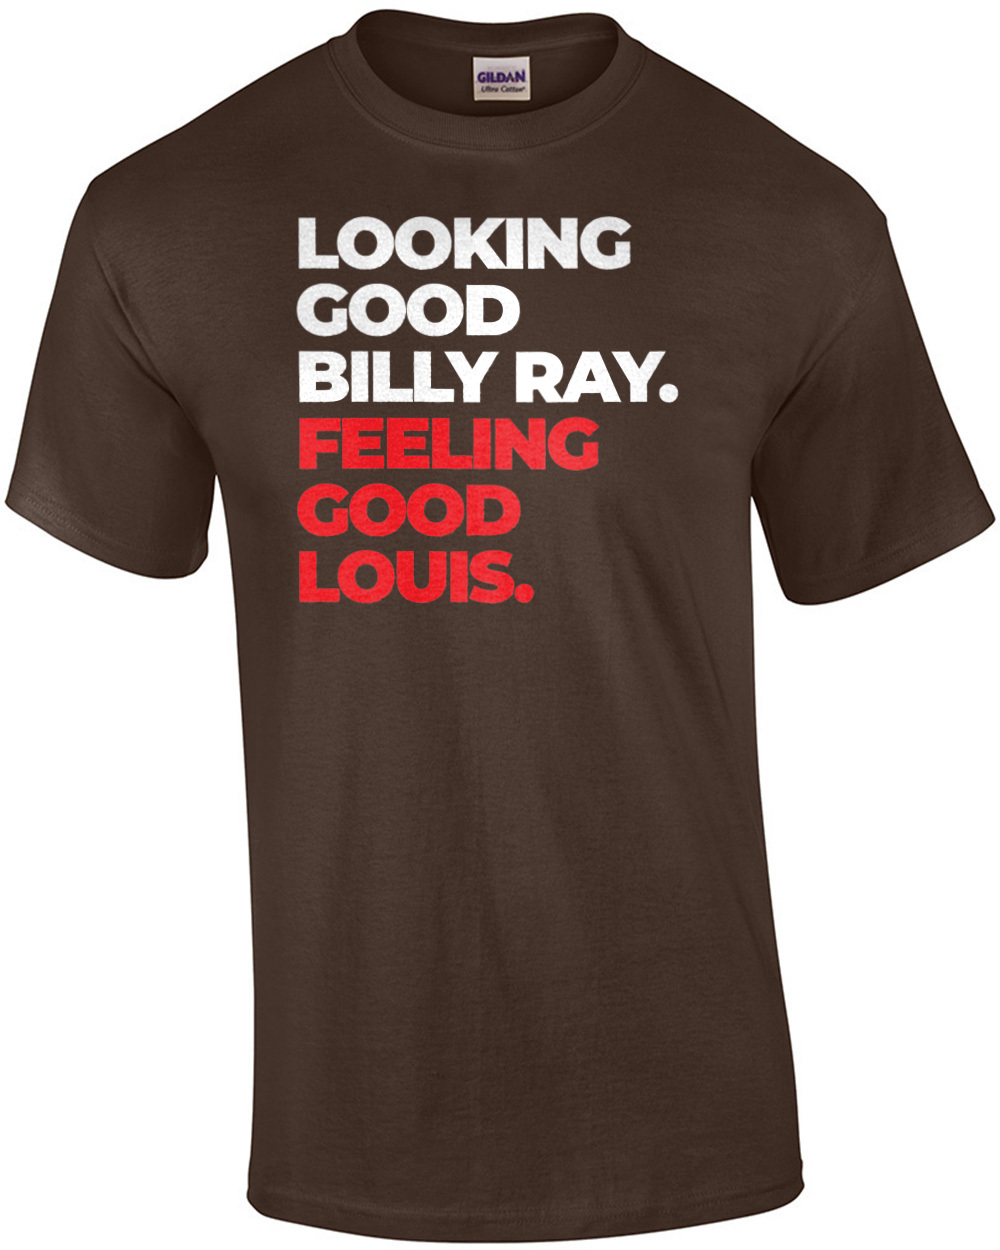 Billy Ray & Louis Trading Places T-Shirt 